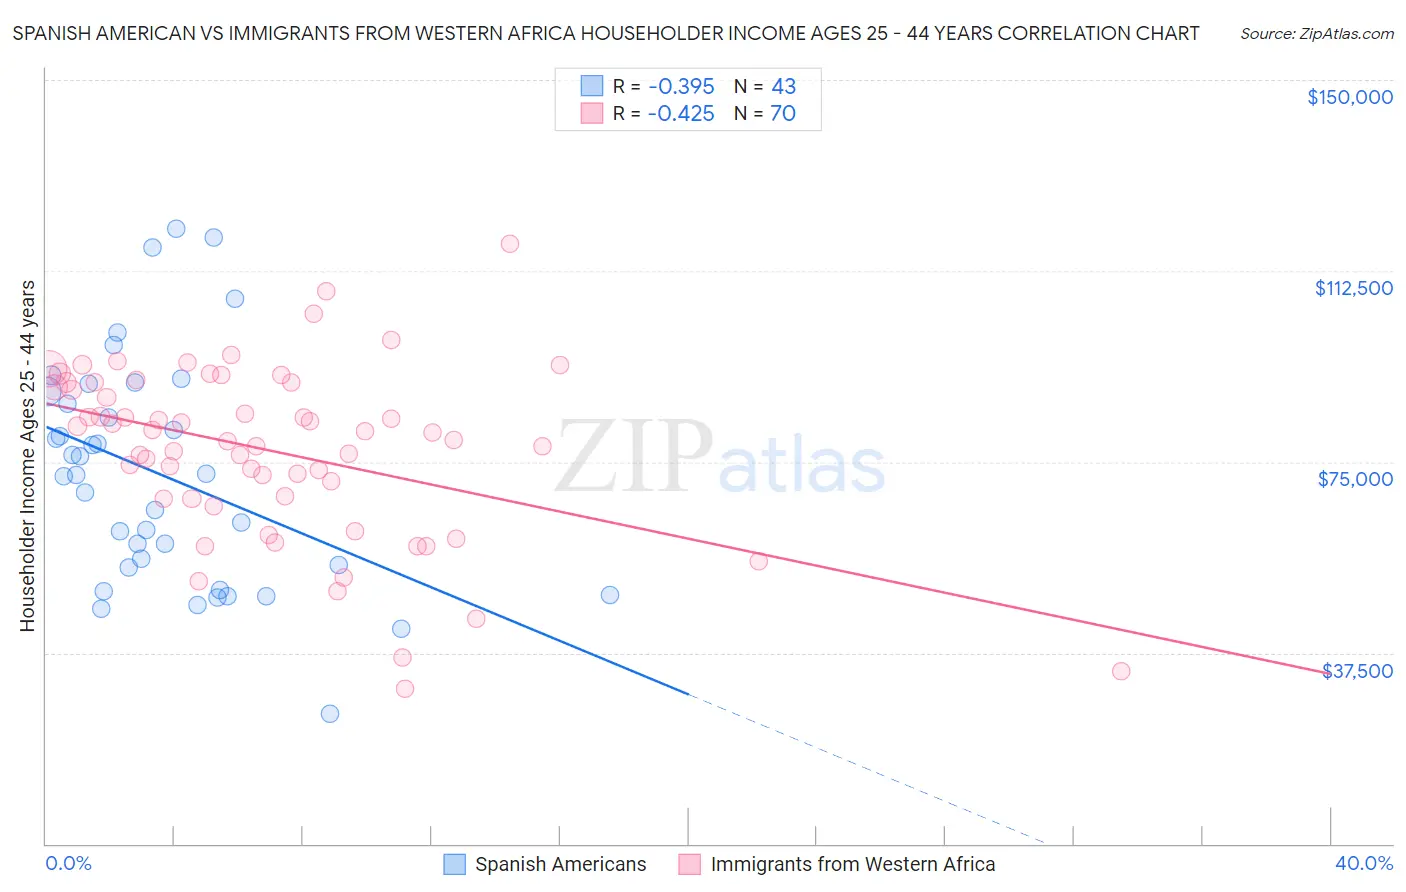 Spanish American vs Immigrants from Western Africa Householder Income Ages 25 - 44 years